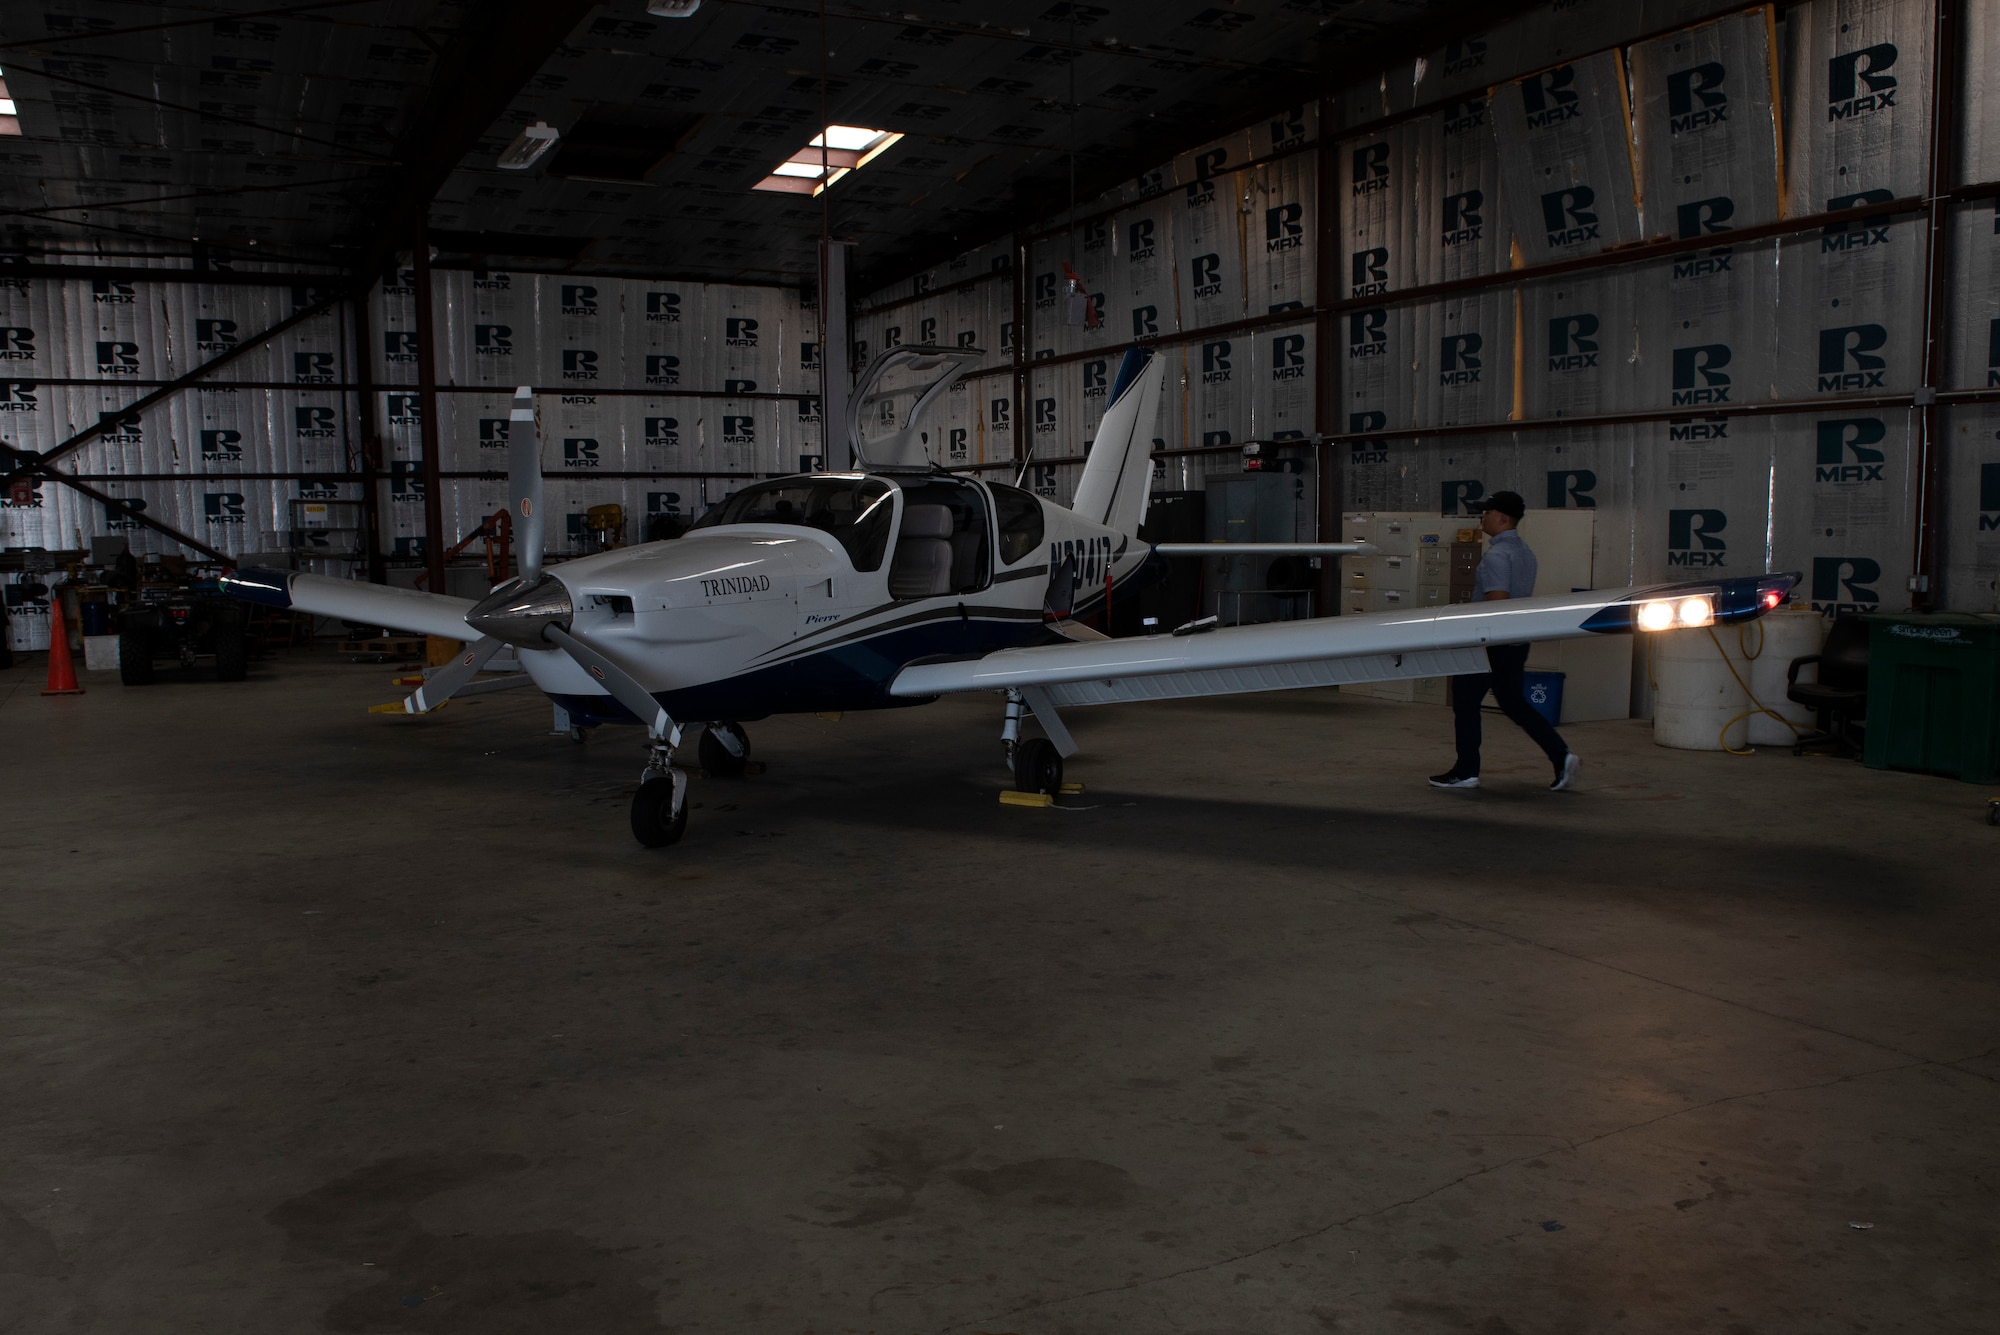 U.S. Air Force Tech. Sgt. Ron, 860th Aircraft Maintenance Squadron flight line expediter, conducts a preflight inspection of a Socata Trinidad TB-20 July 27, 2019, in Rio Vista, California, prior to a flight over the San Francisco Bay Area. Ron has accumulated more than 250 flying hours and completed Air Force remote pilot aircraft training July 12. (U.S. Air Force photo by Tech. Sgt. James Hodgman)